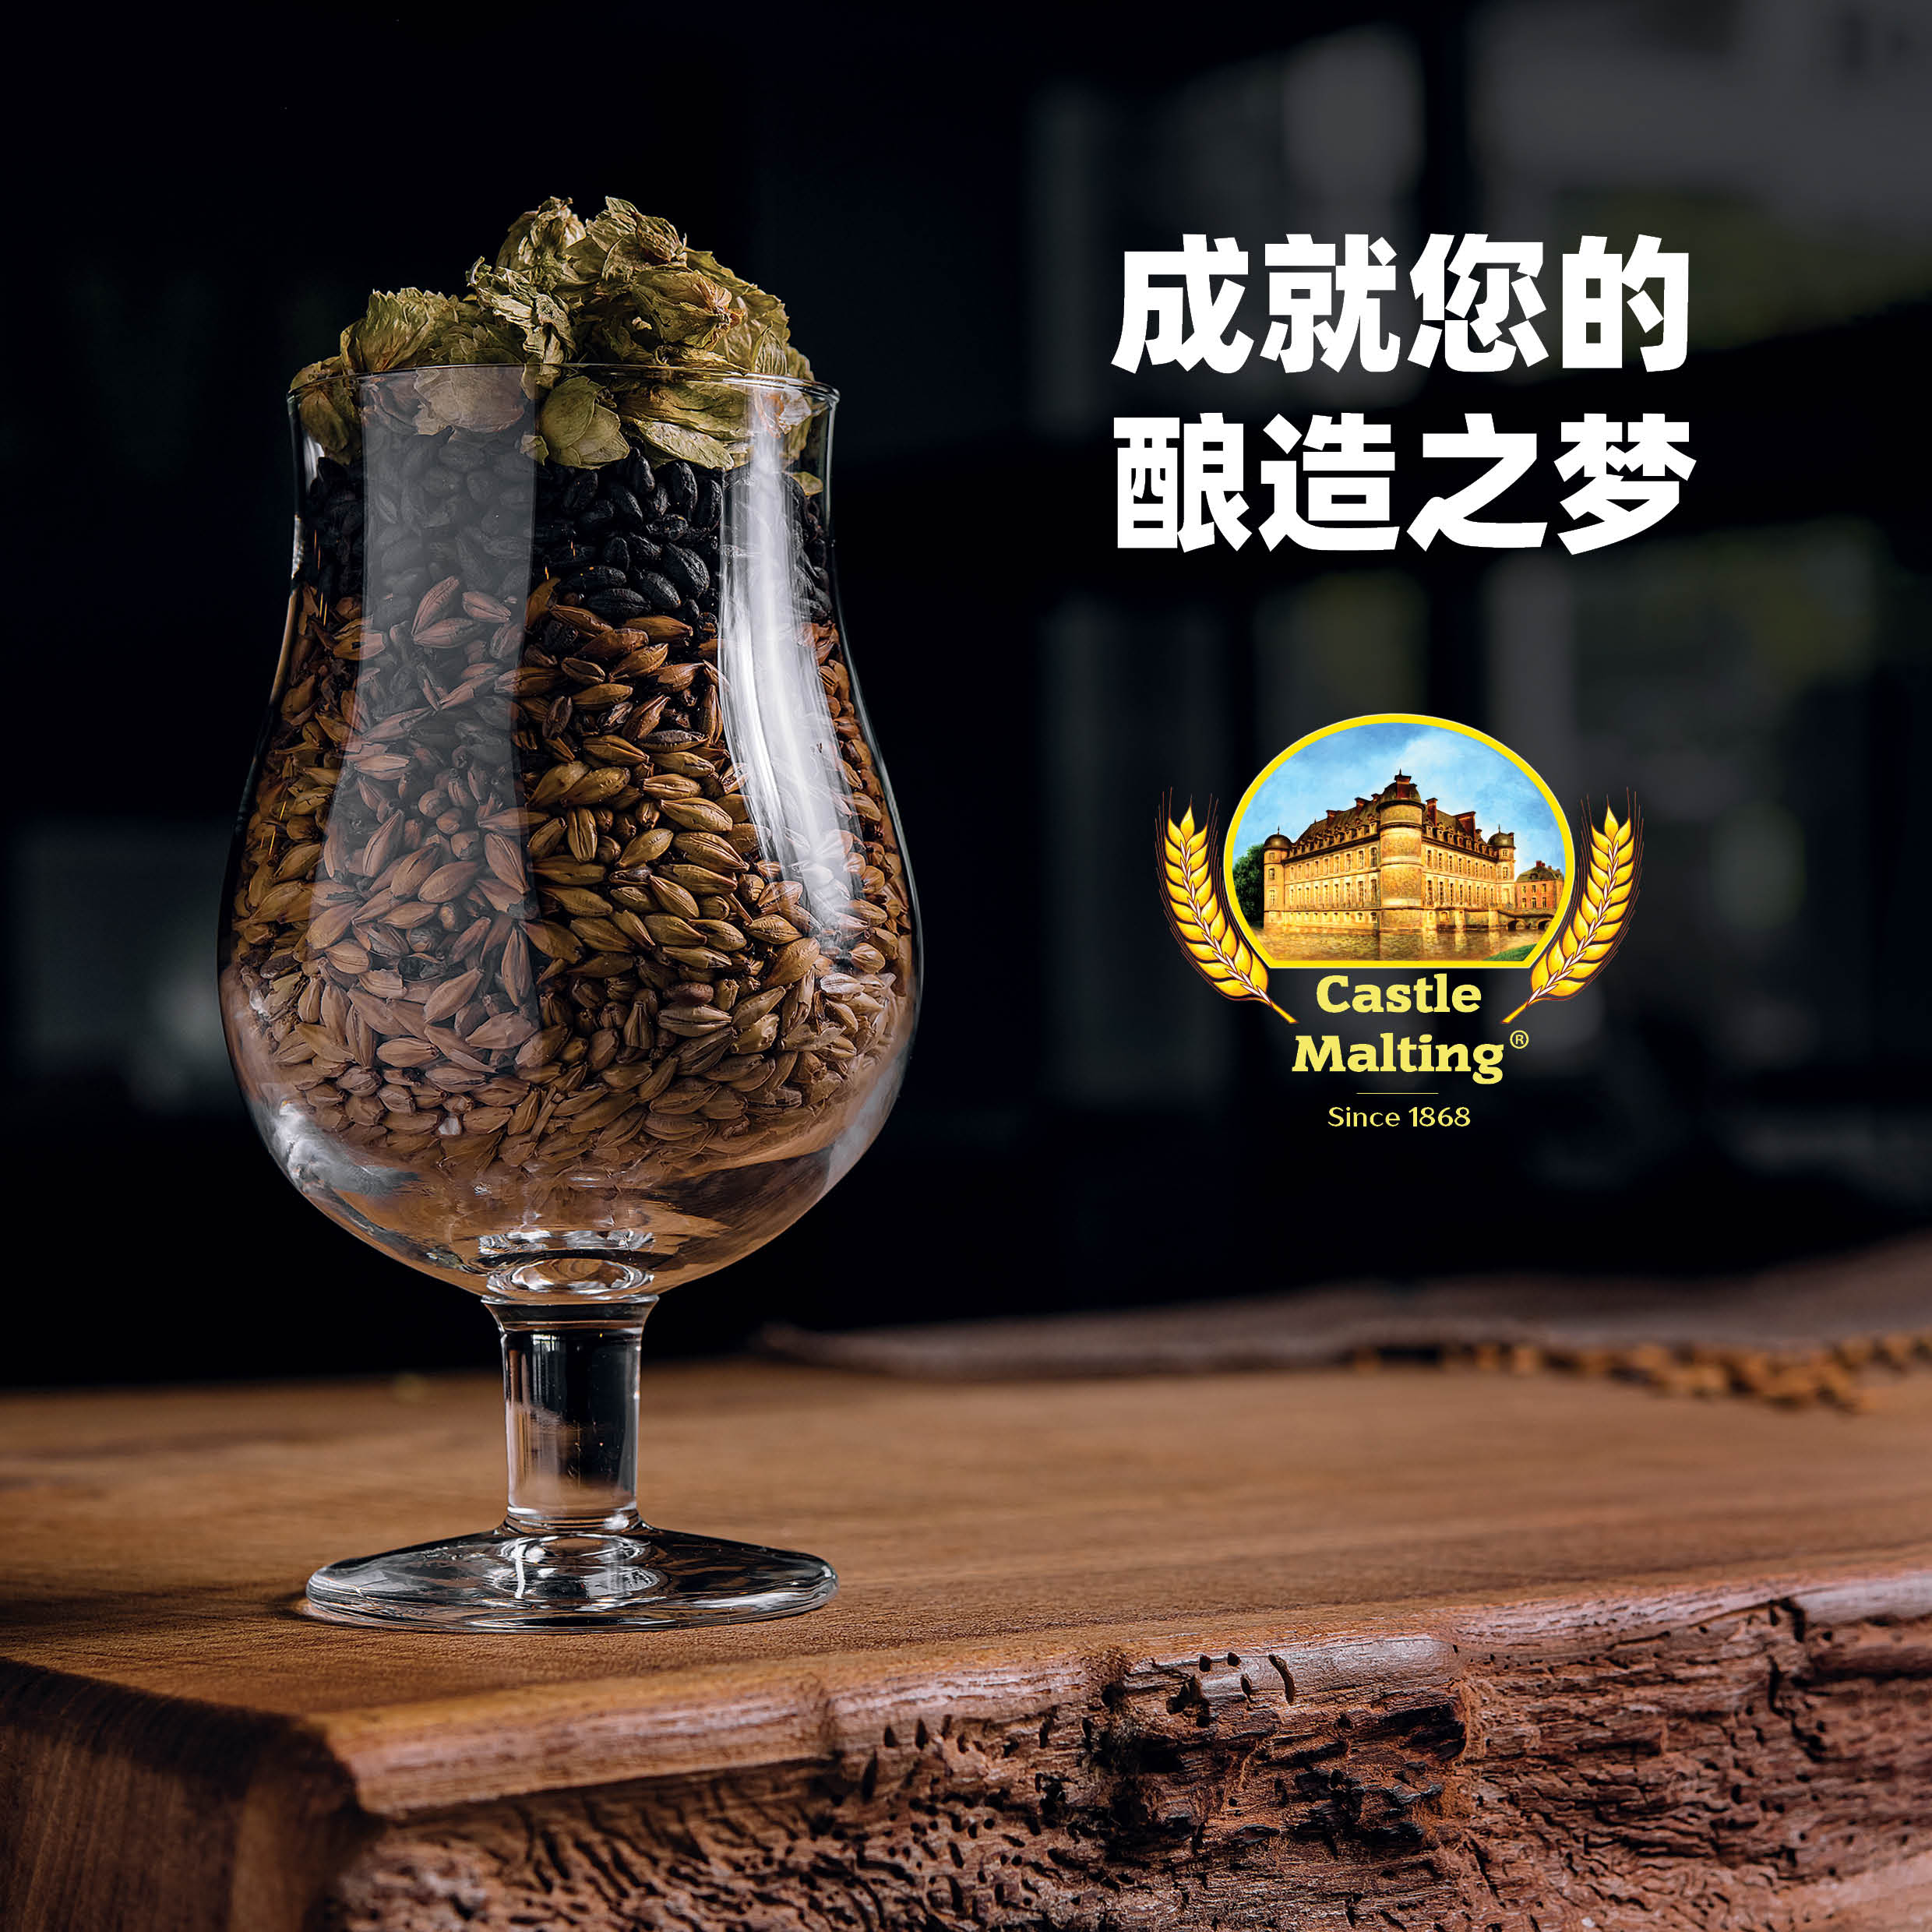 Castle Malting Brochure in Chinese (110 pages)